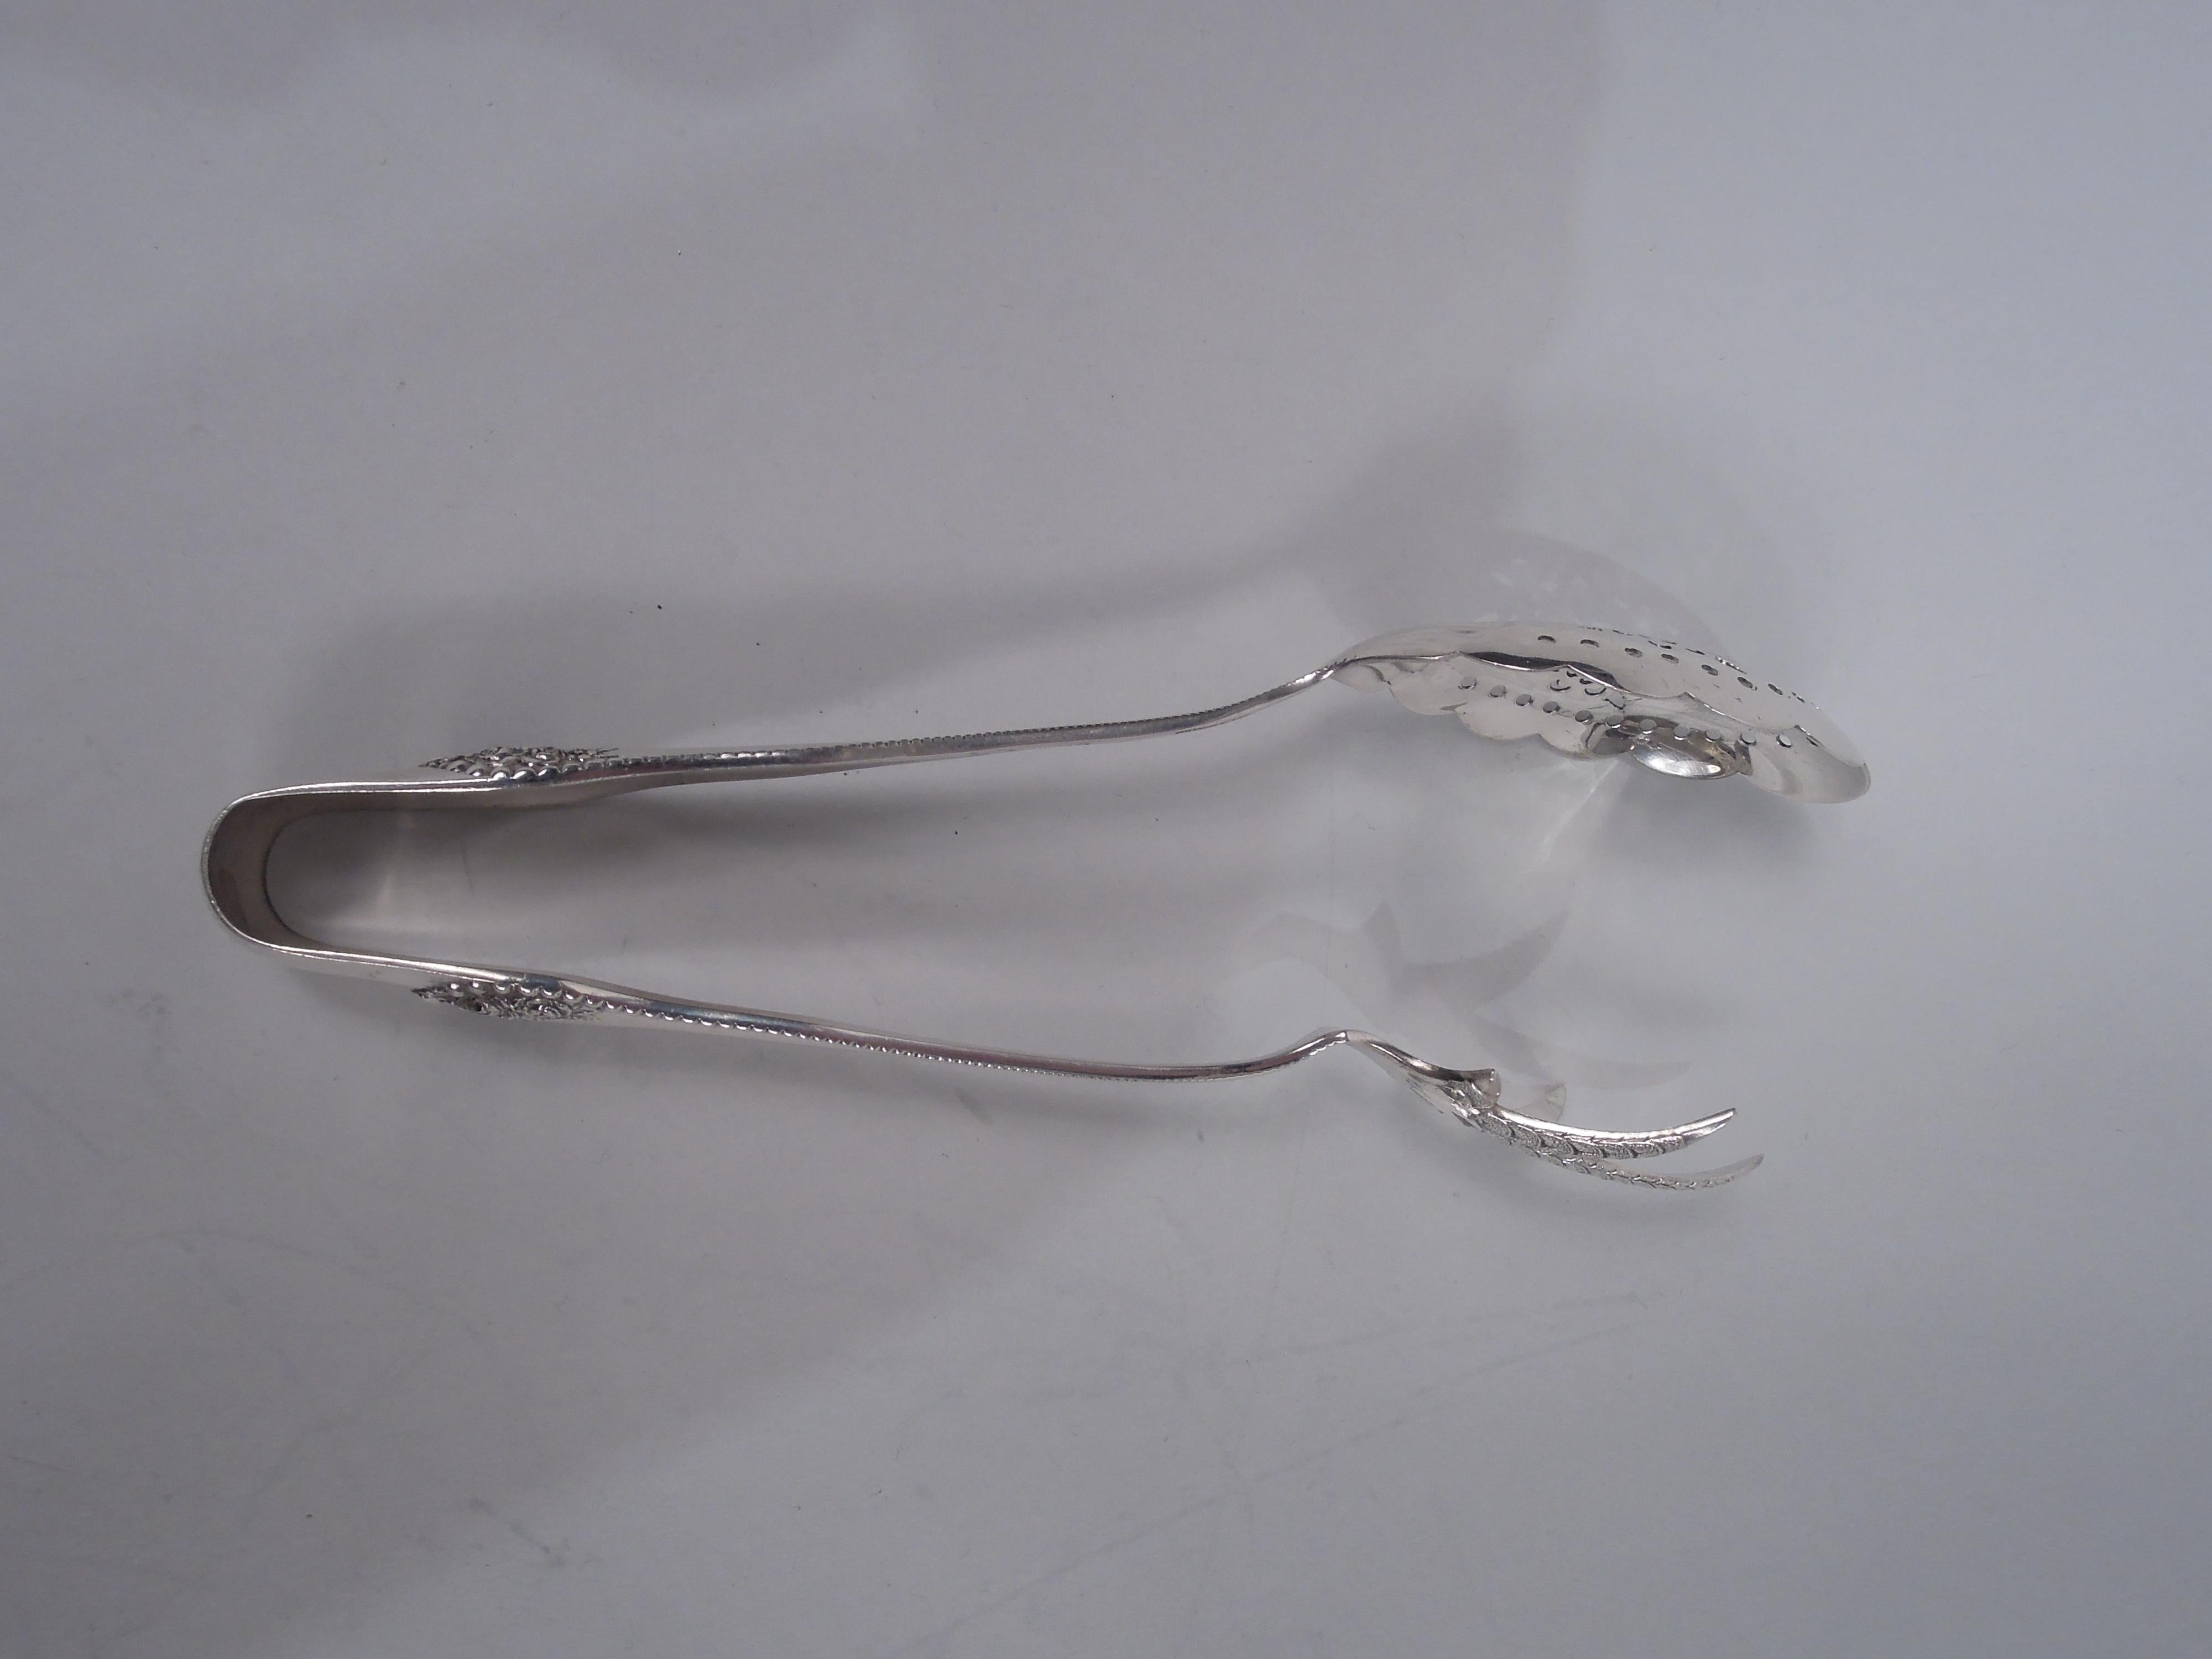 Pair of Lancaster sterling silver ice tongs. Made by Gorham in Providence, ca 1900. U-form with beaded stem and floral terminal. One jaw ovoid and scalloped with ornamental piercing; the other a cast claw with five talons. A nice early piece in this